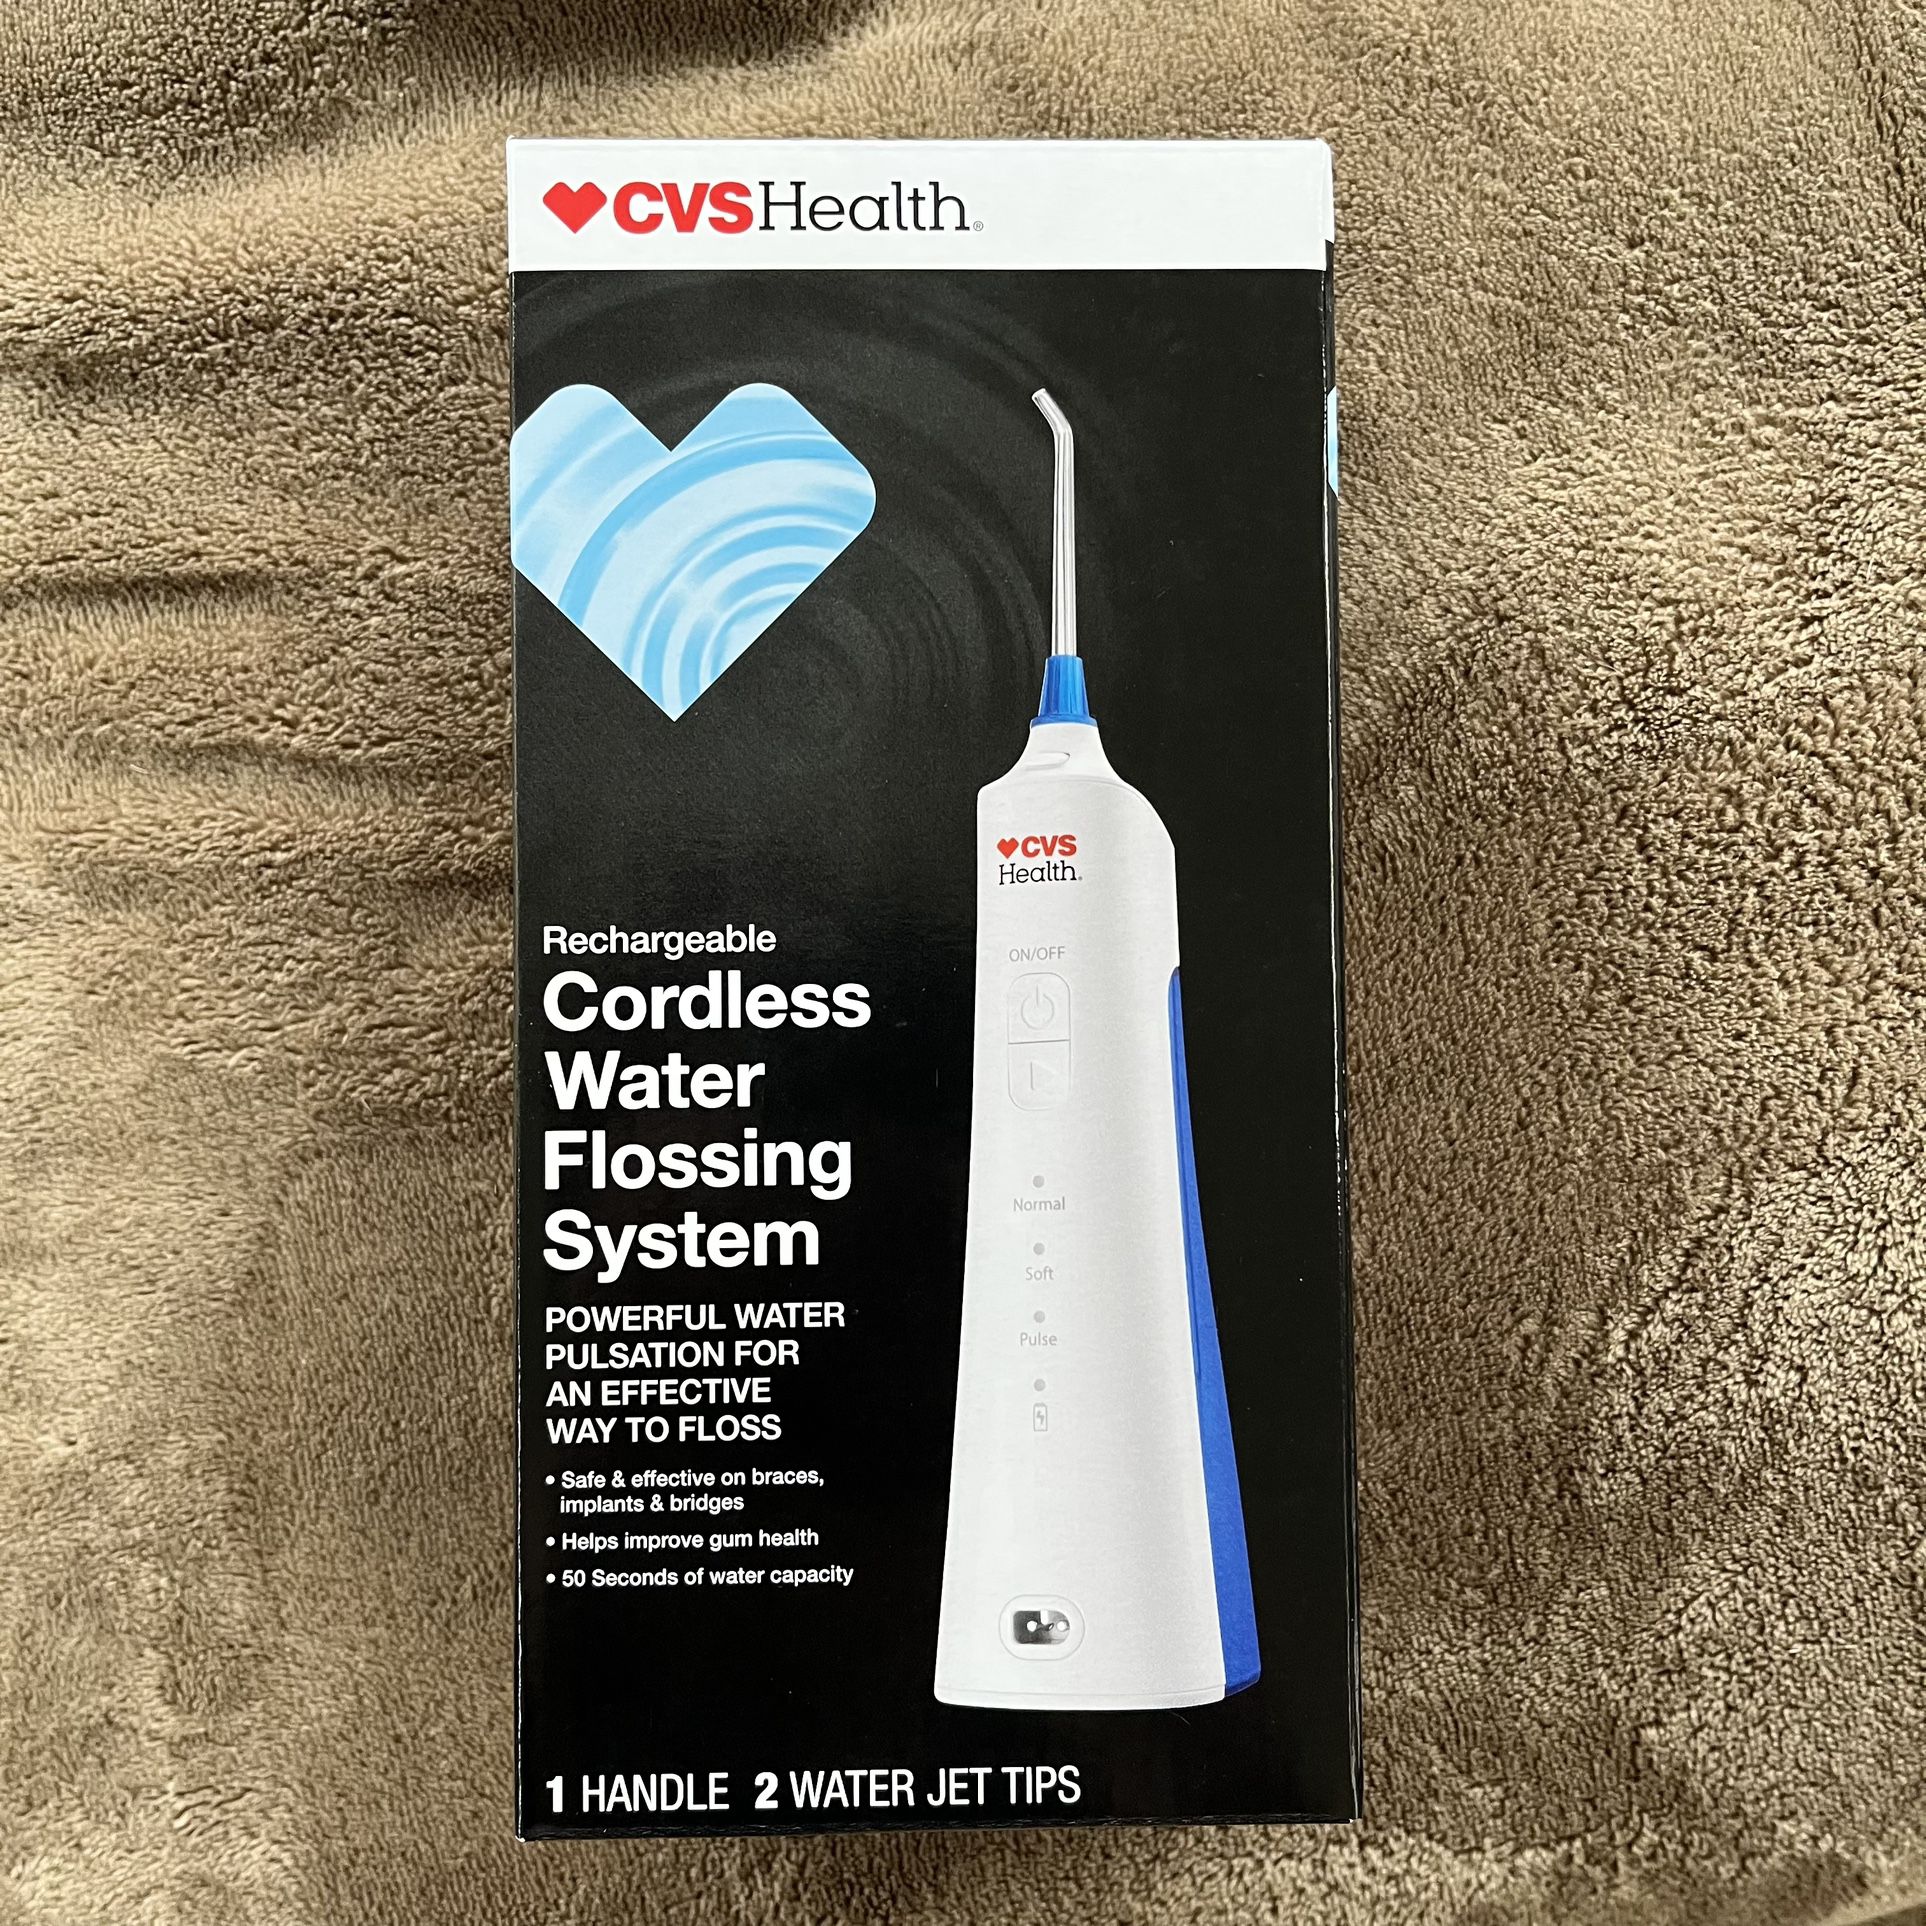 Rechargeable Cordless Water Flossing System